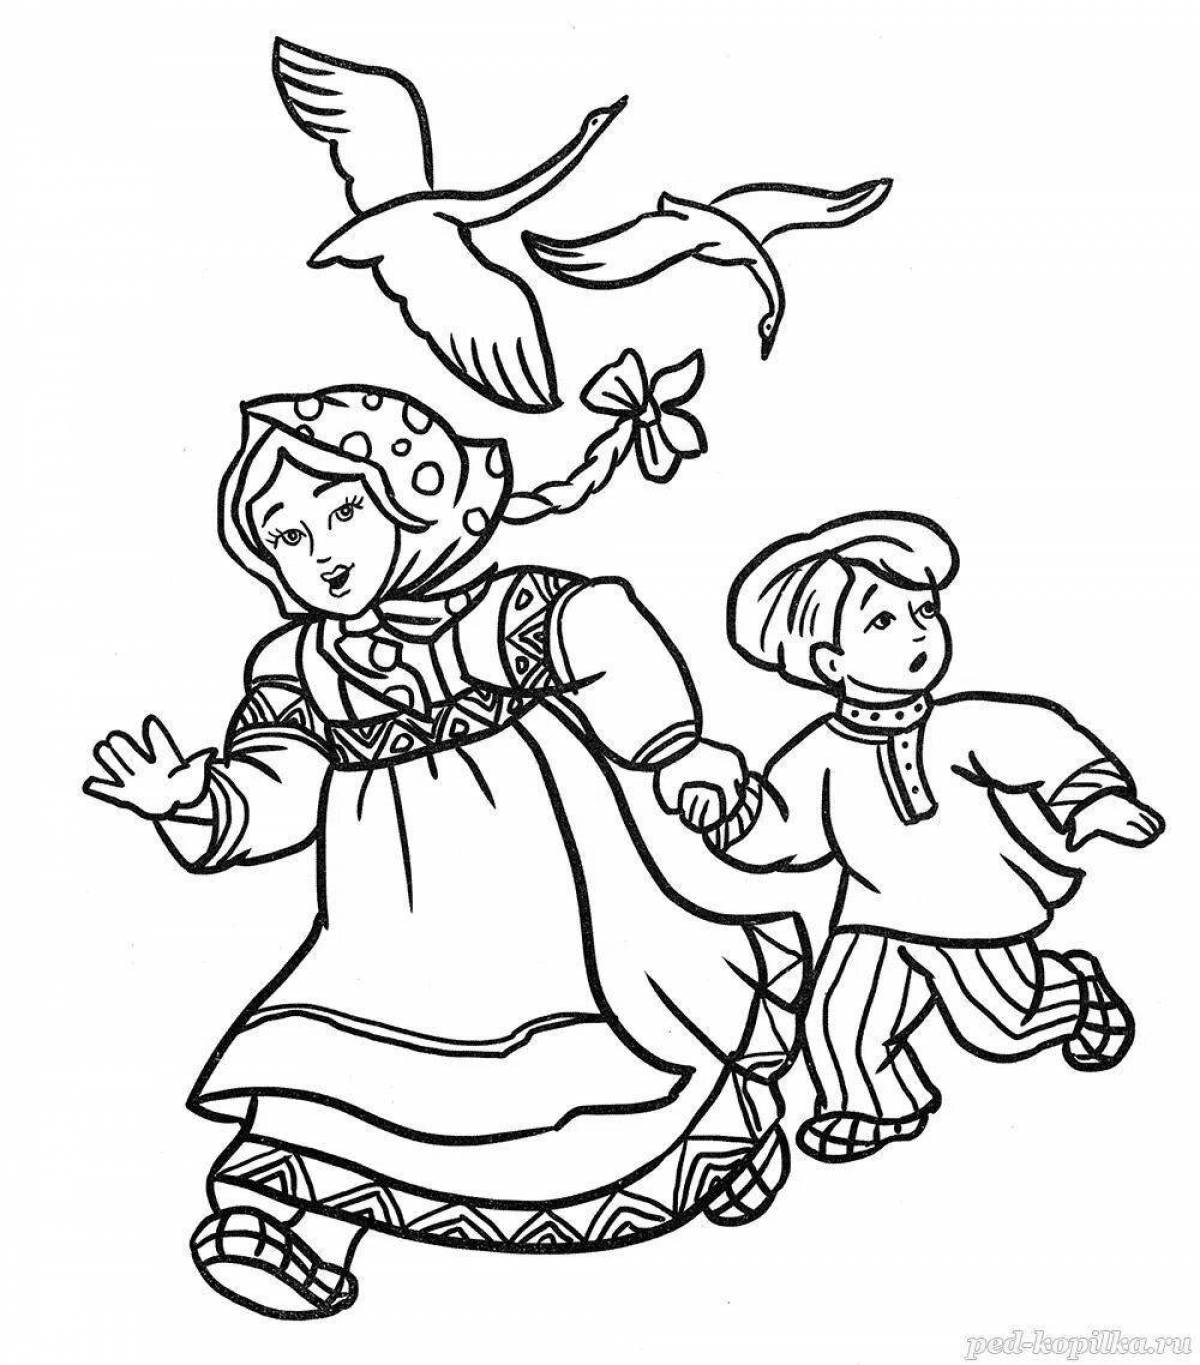 Fantastic swan geese coloring page